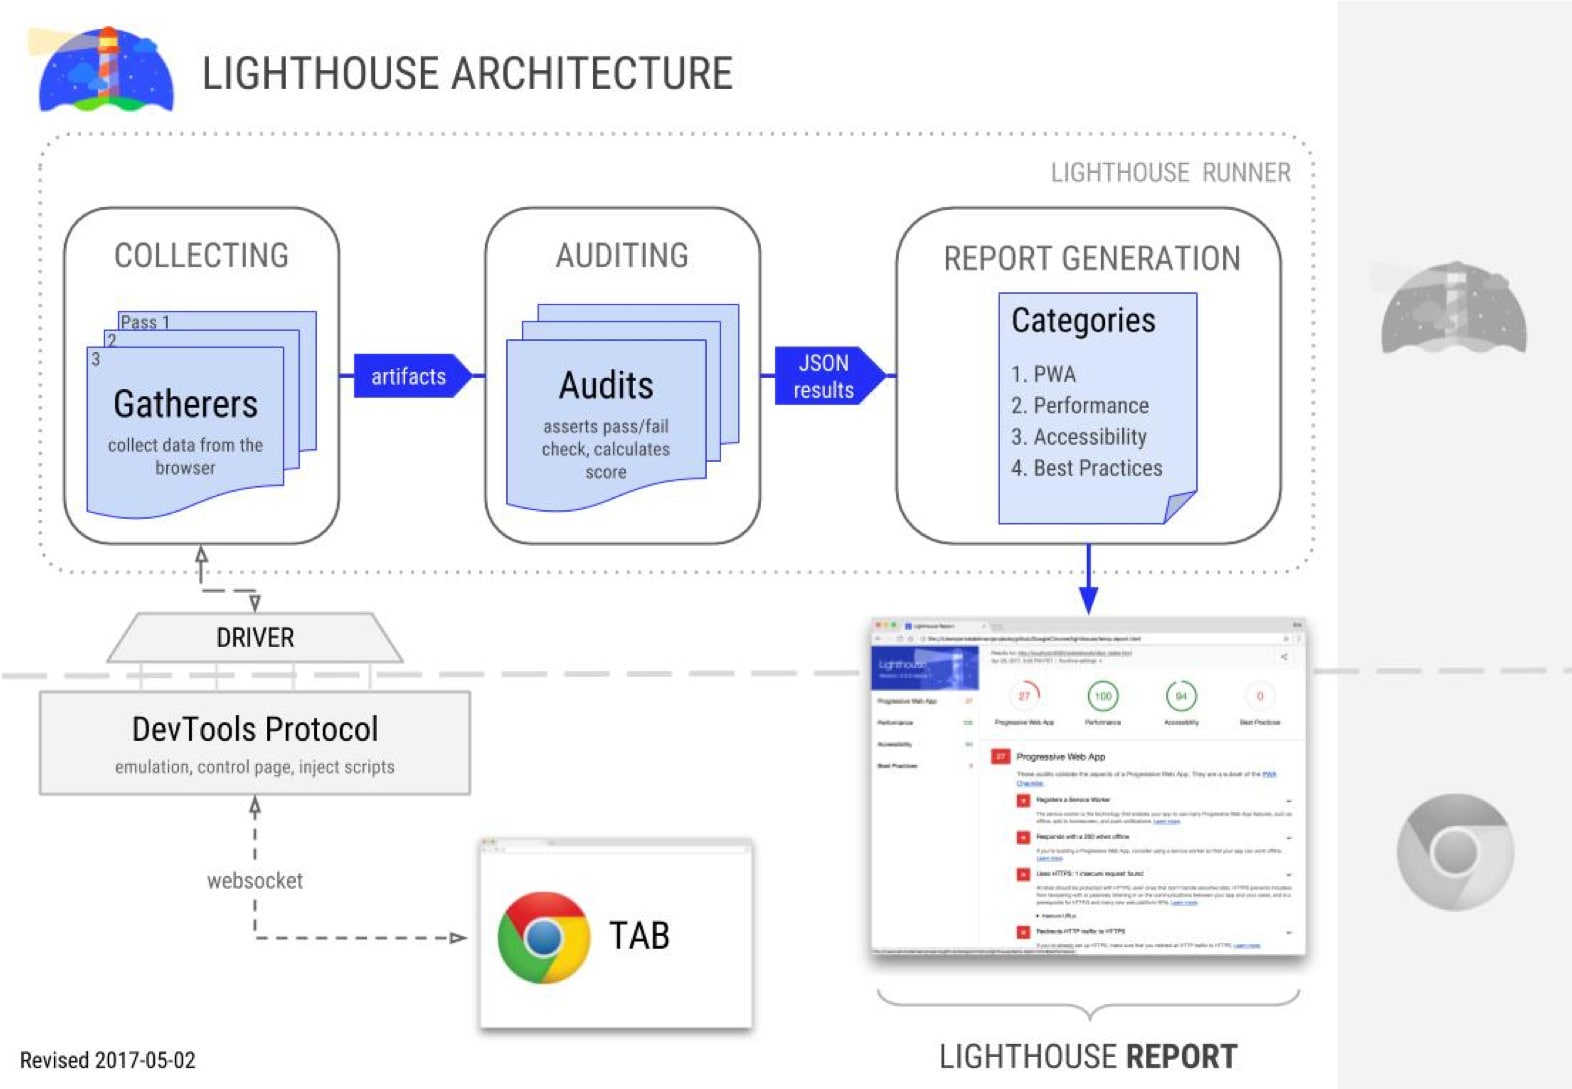 A screenshot of the Lighthouse architecture